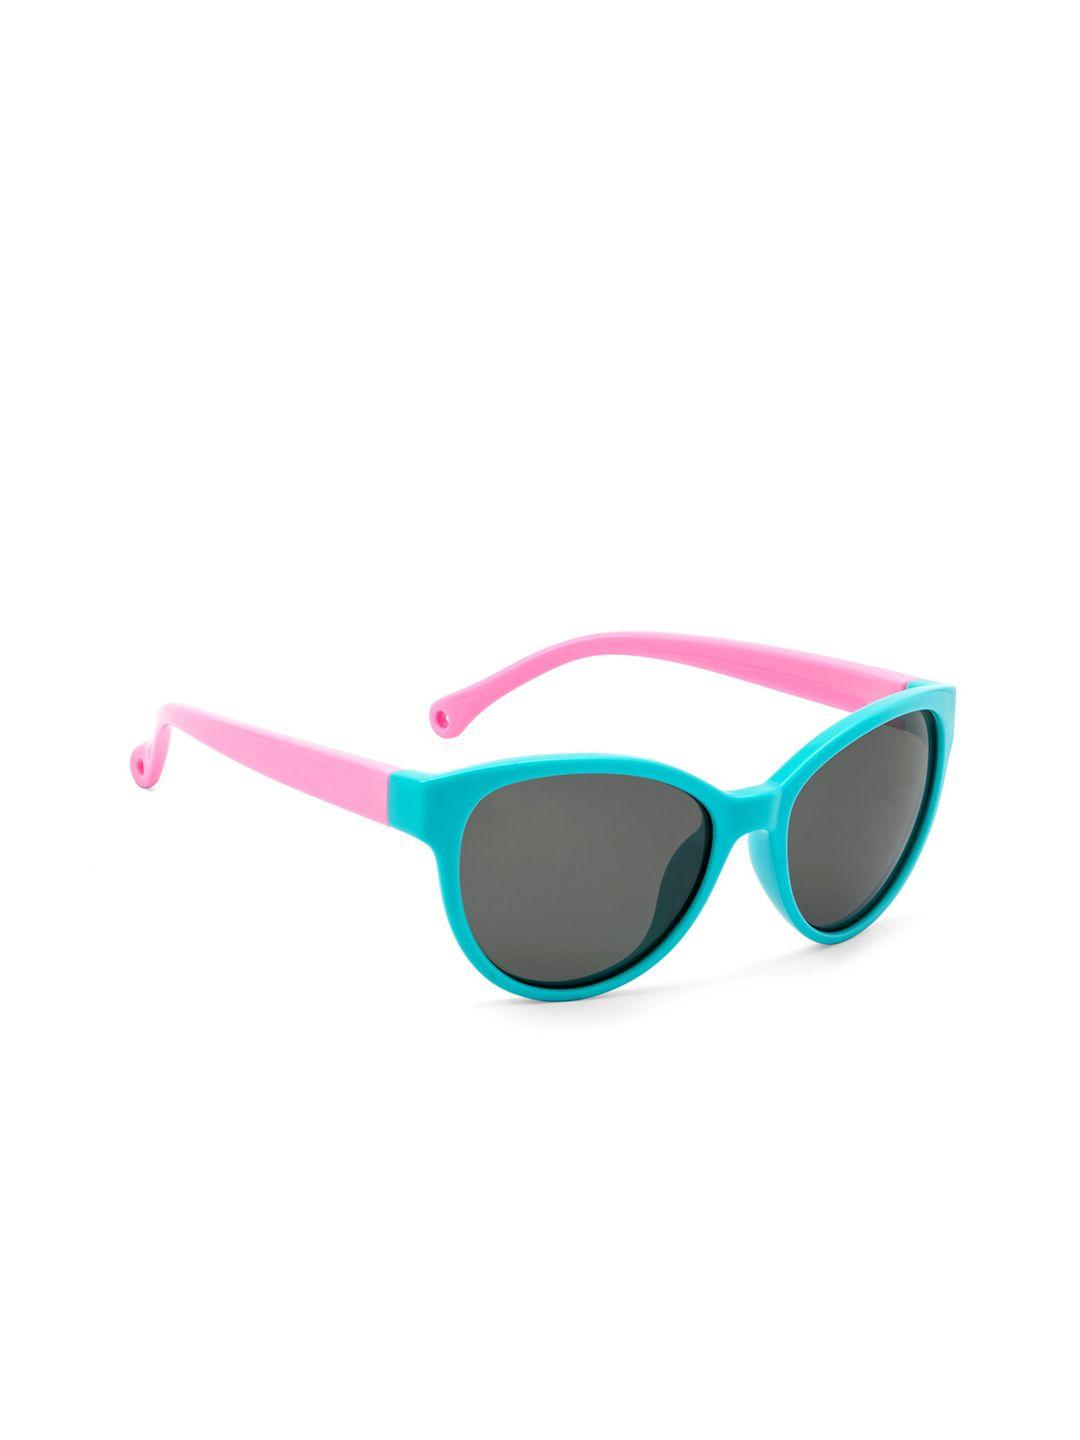 royal son girls cateye sunglasses with polarised and uv protected lens